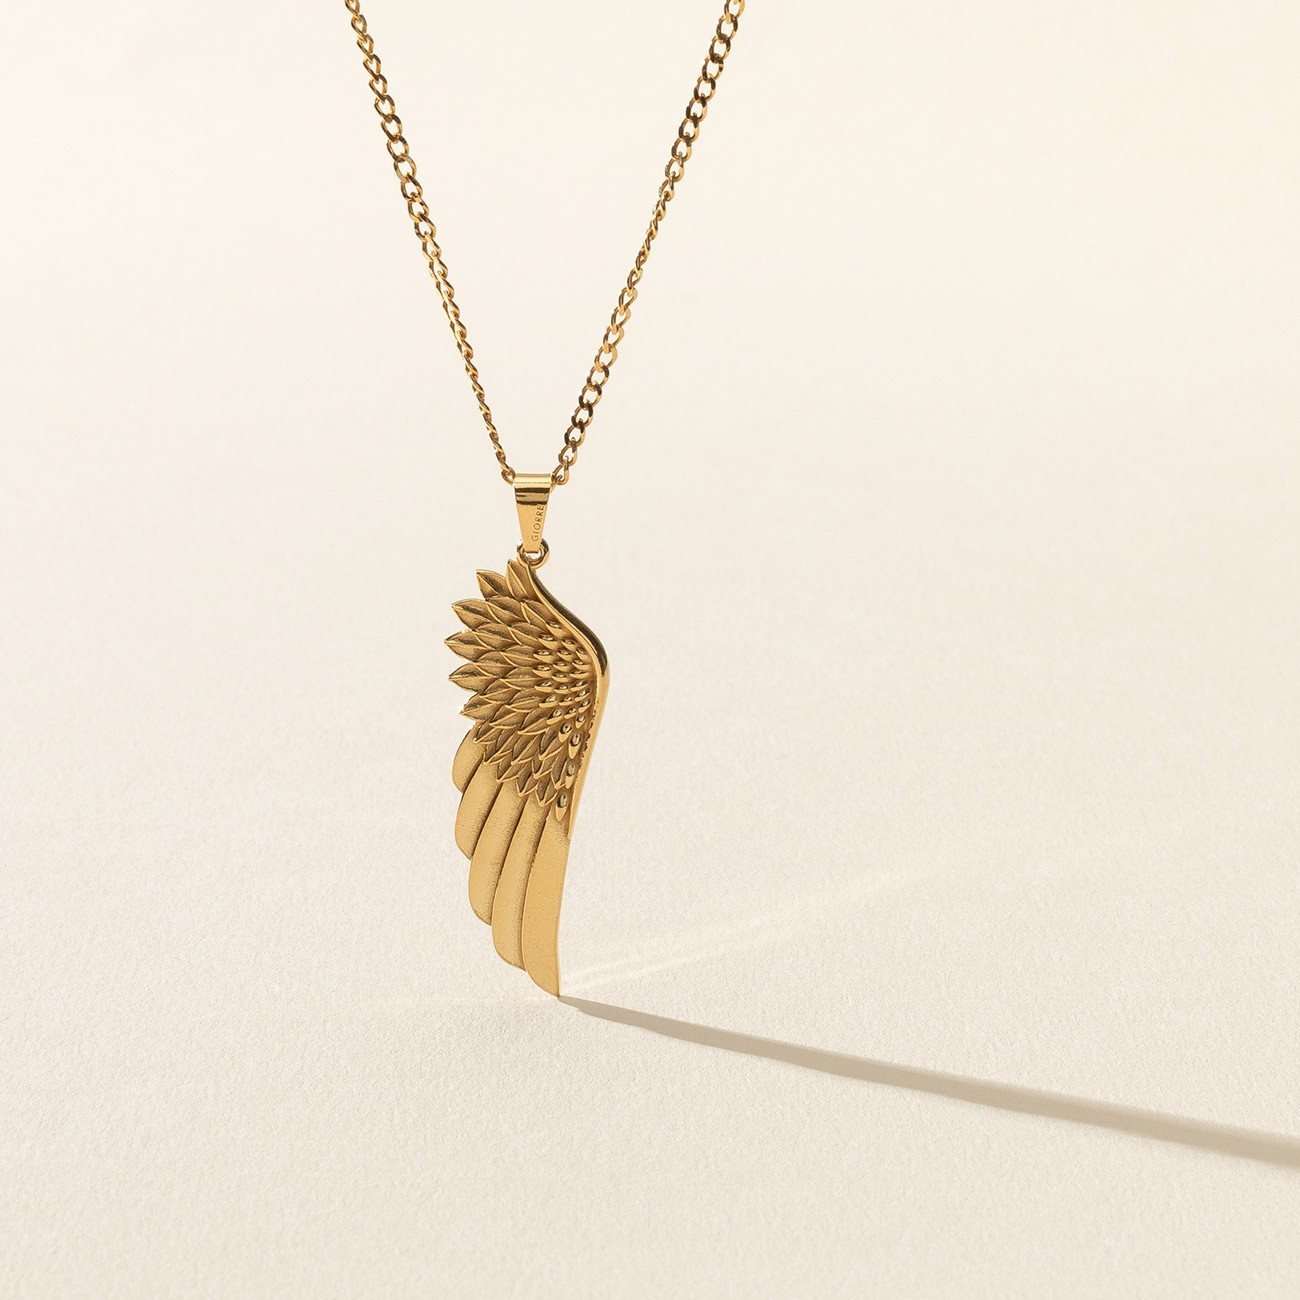 Angel wing necklace, sterling silver 925